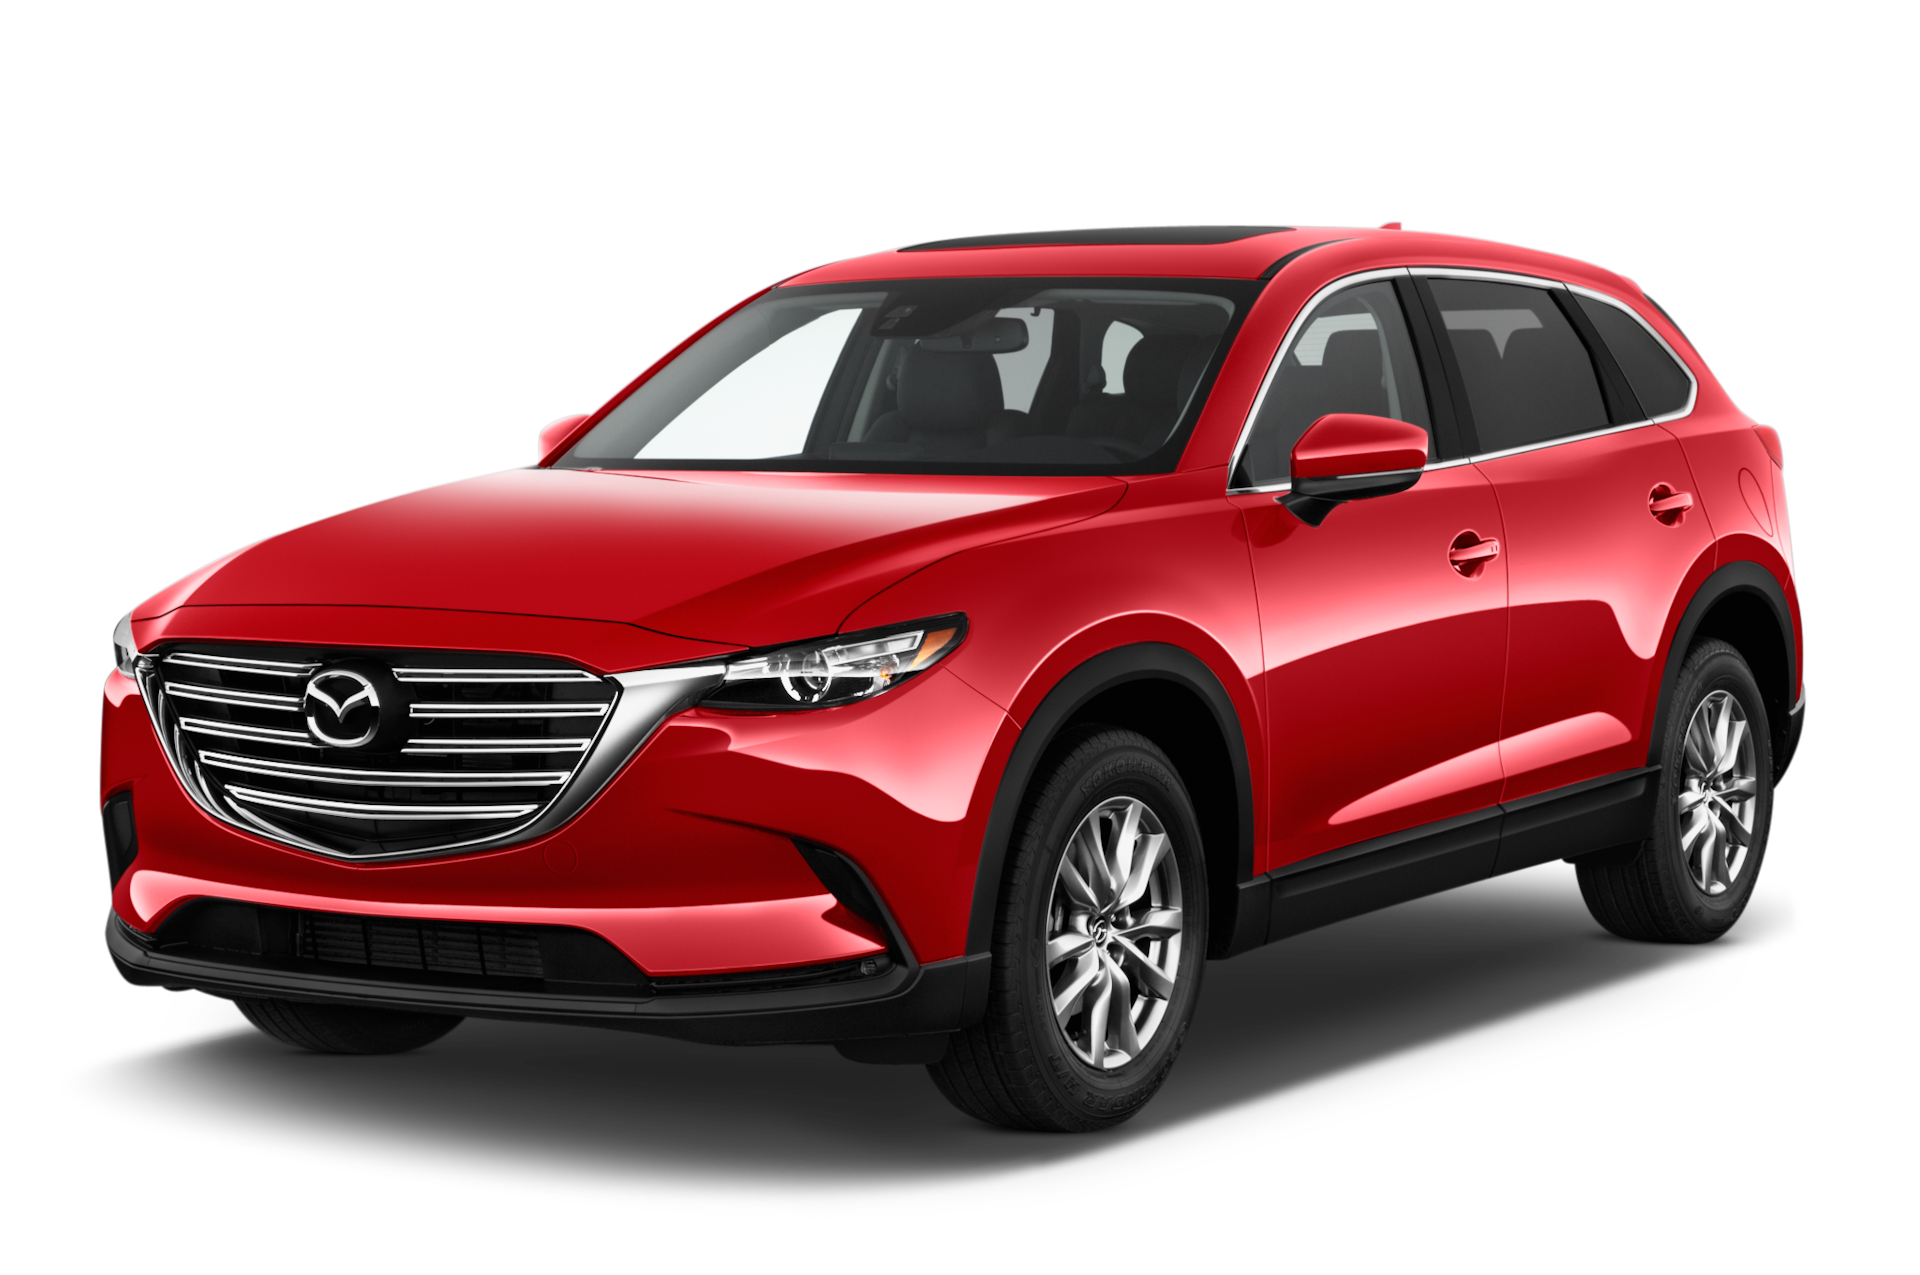 2016 Mazda CX-9 Prices, Reviews, and Photos - MotorTrend